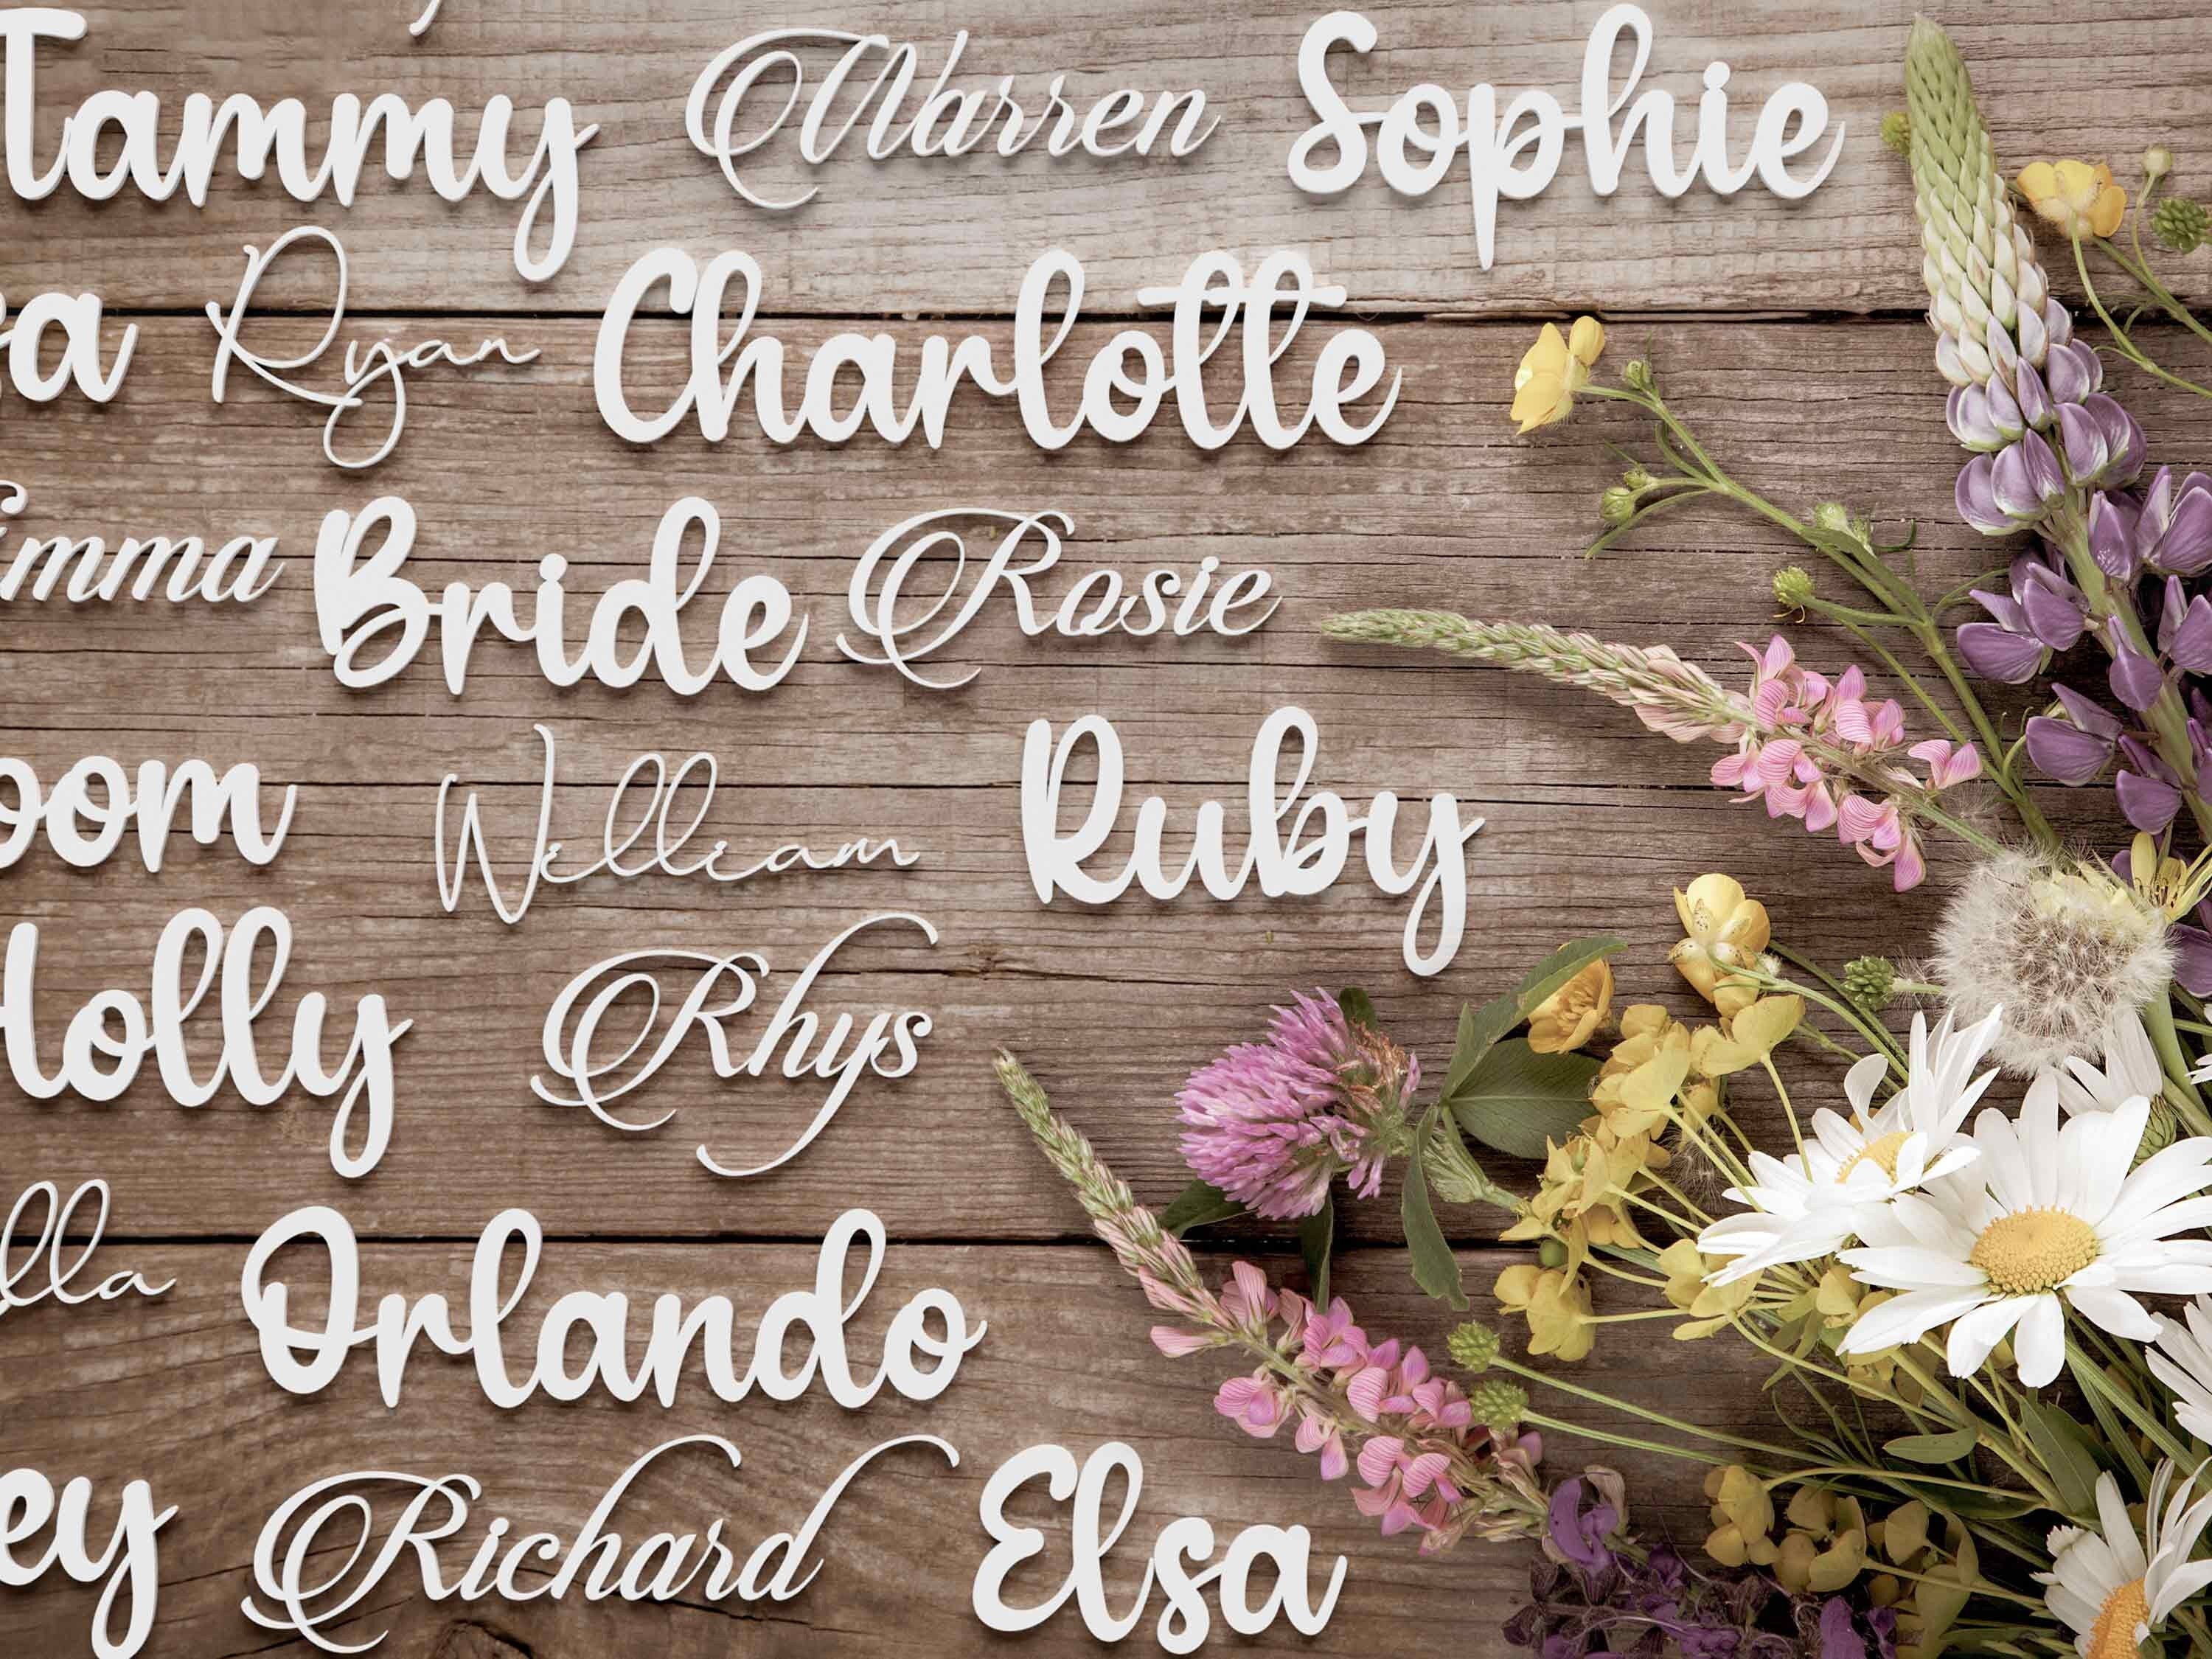 White Acrylic Table Name Tags. Personalised Wedding Place Names. Cards For Weddings. Made From Acrylic